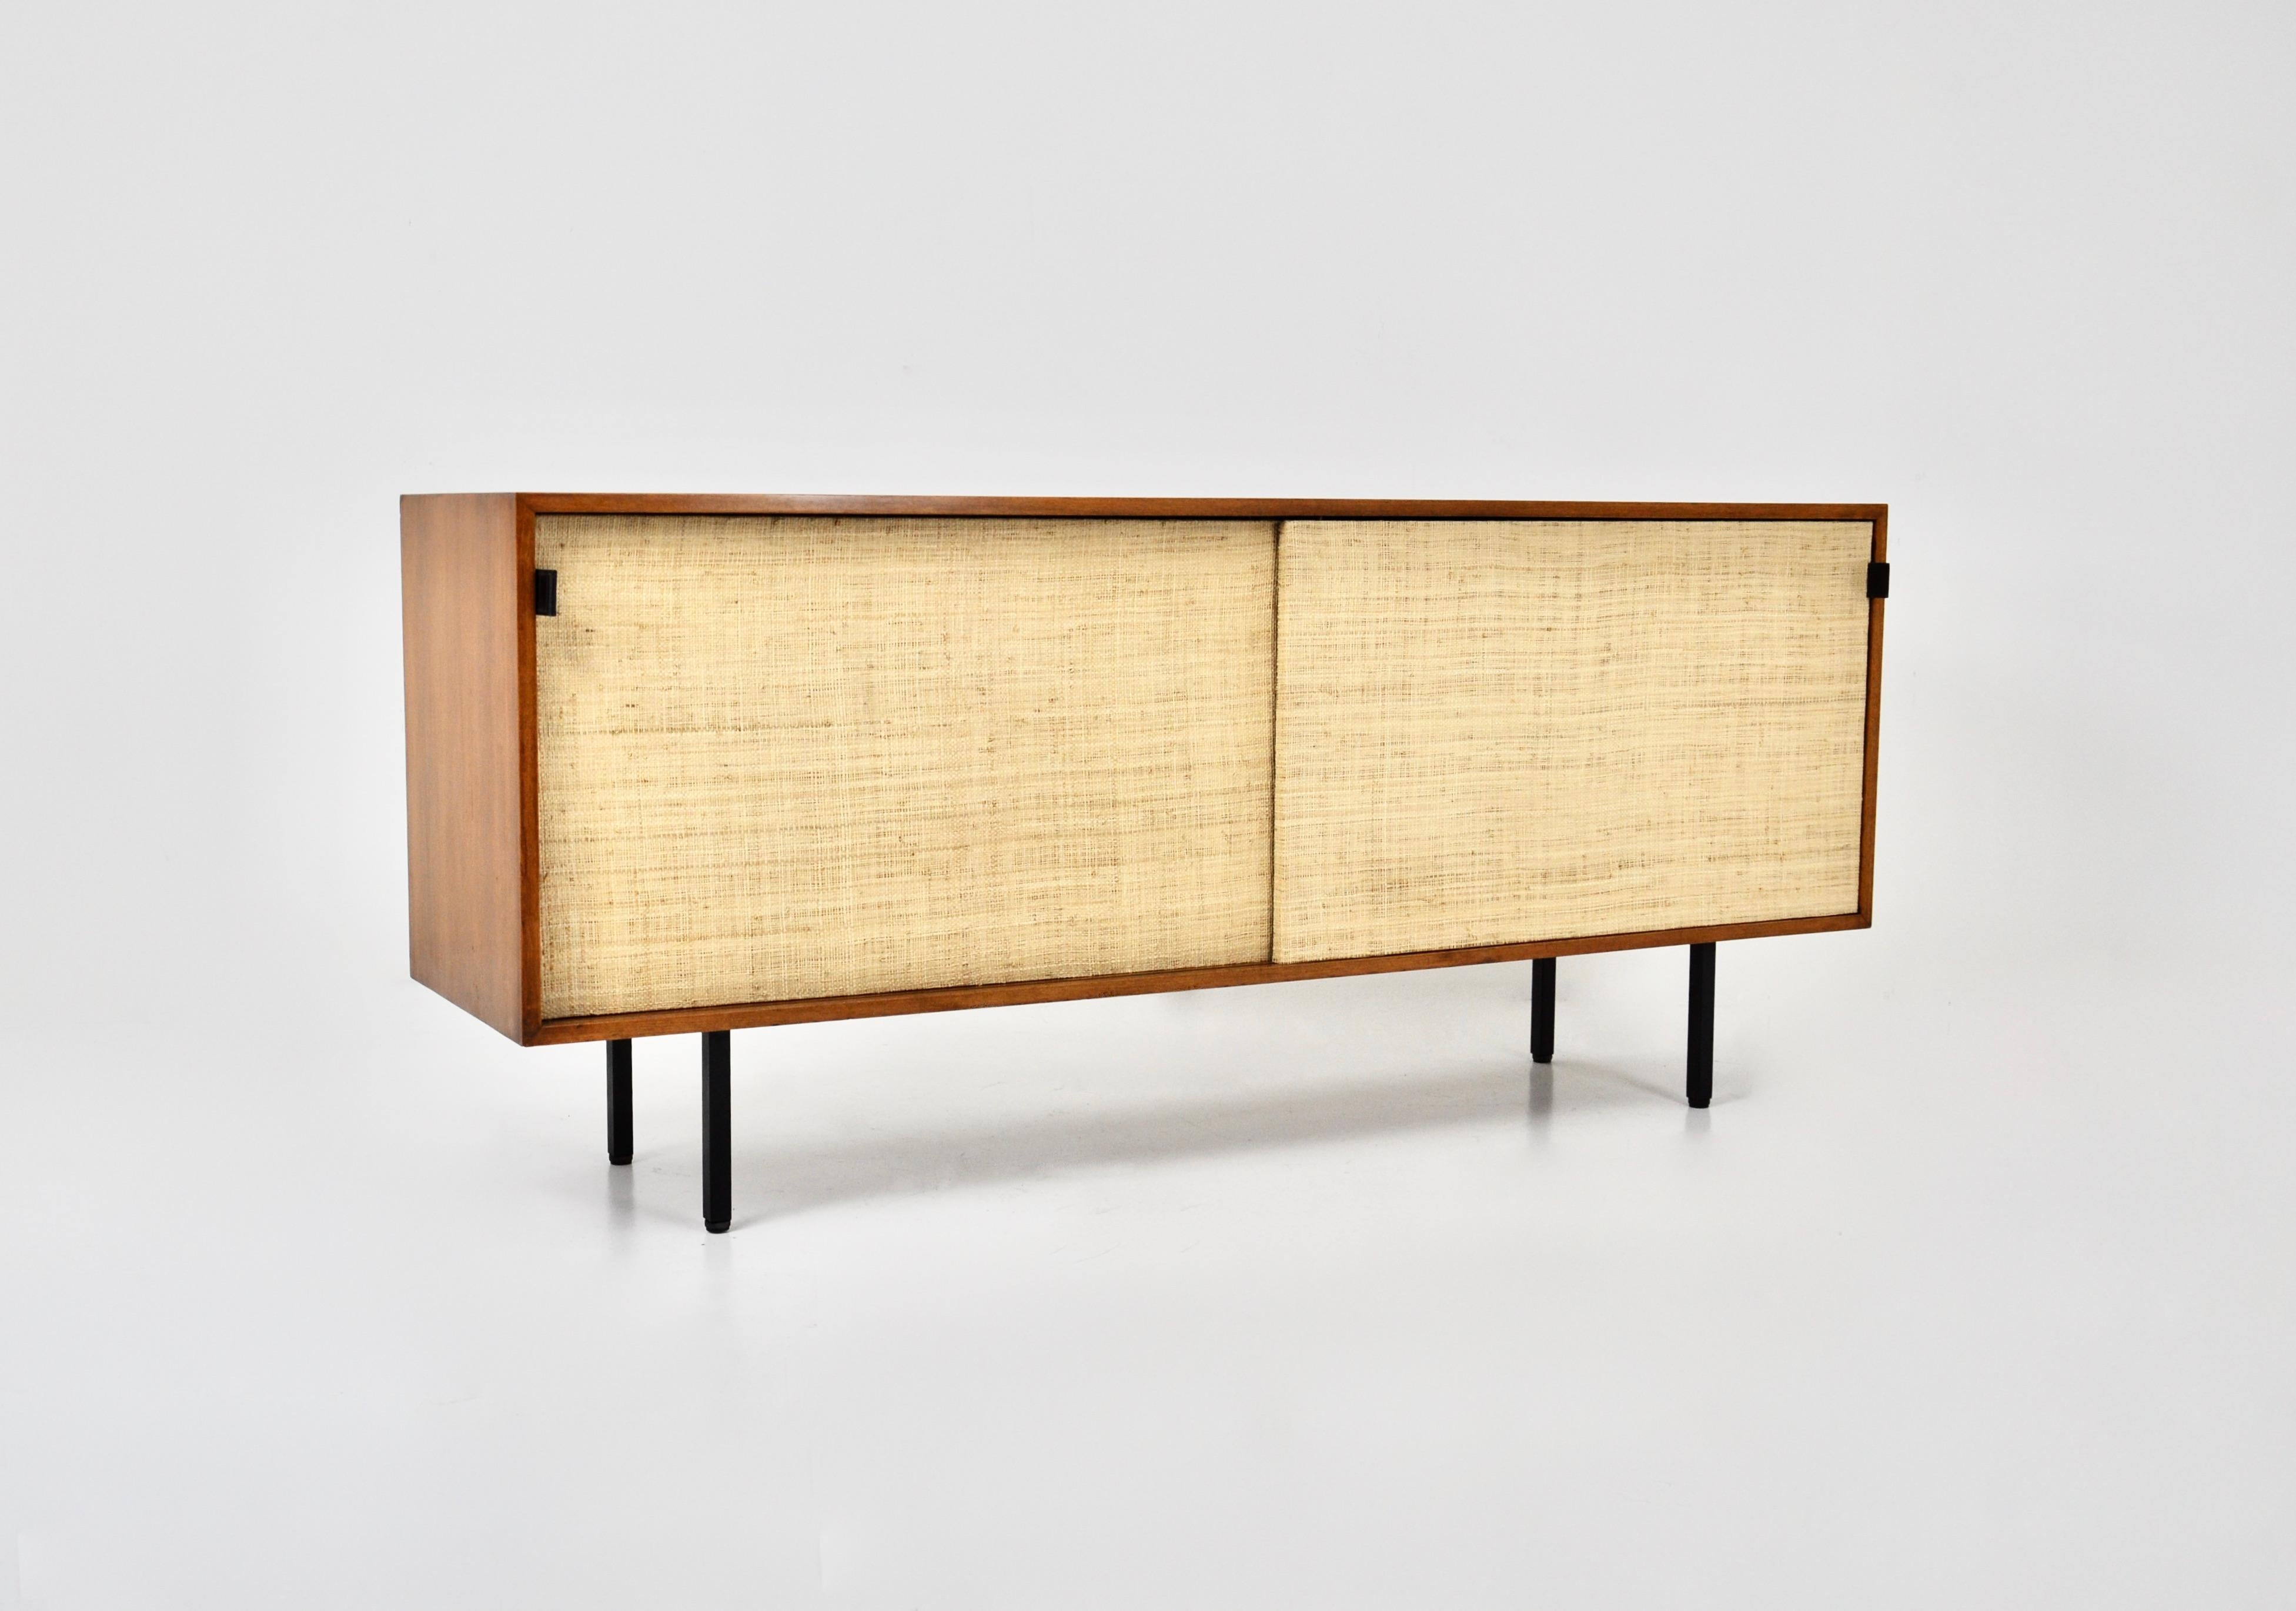 Sideboard with two sliding doors upholstered in elm wood cord with leather handles. Adjustable intermediate boards. Wear due to time and age of the sideboard.